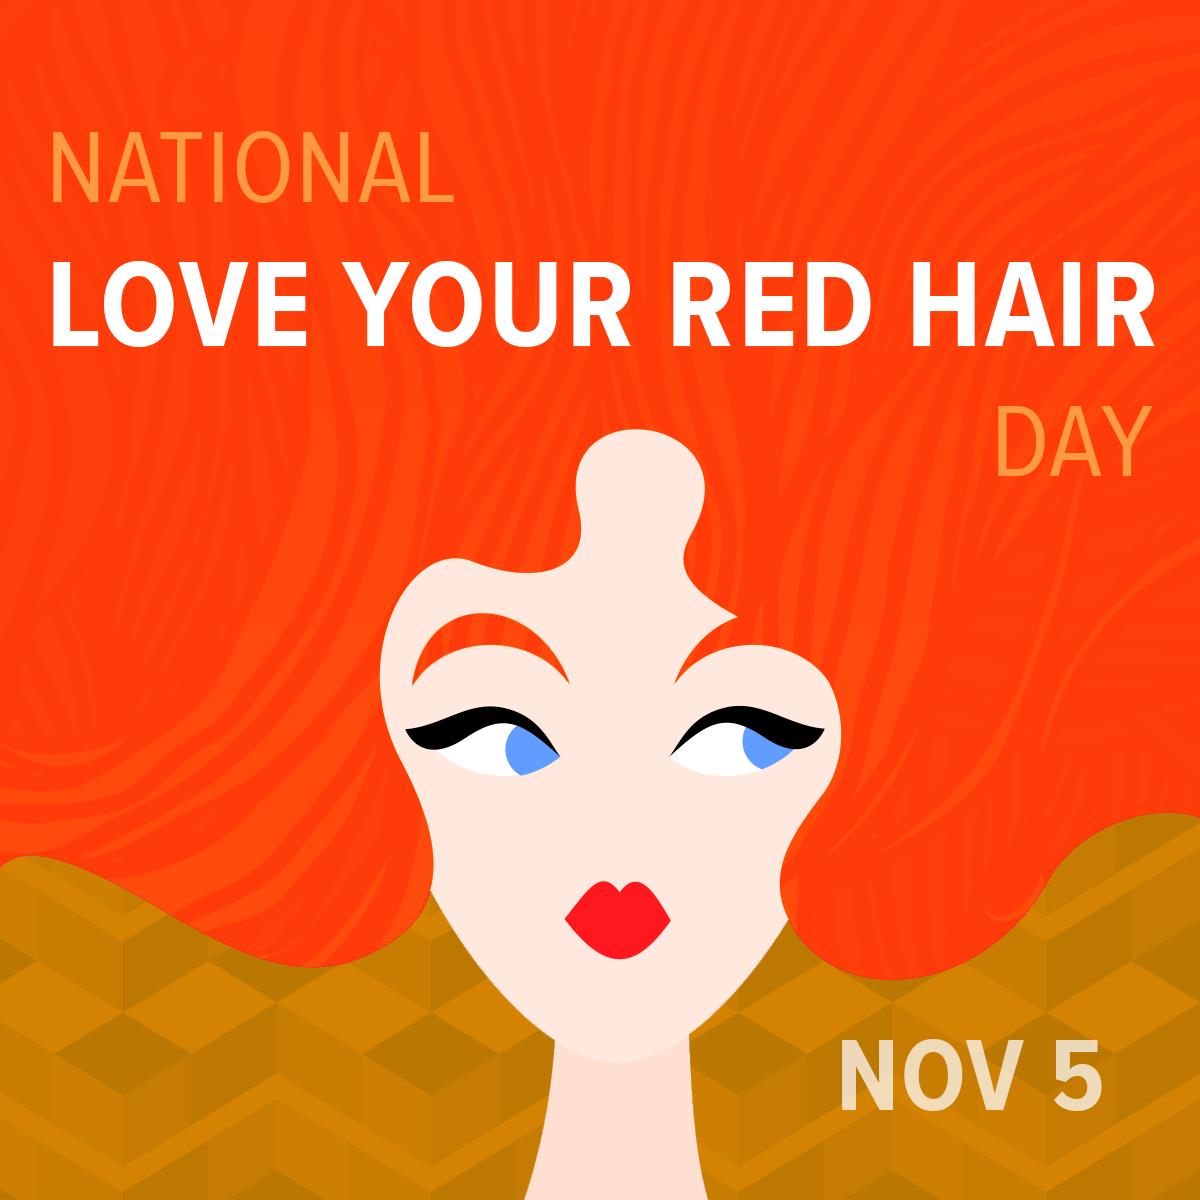 Redhead day is Nov. 5! 9 fun facts about red hair CBS News 8 San